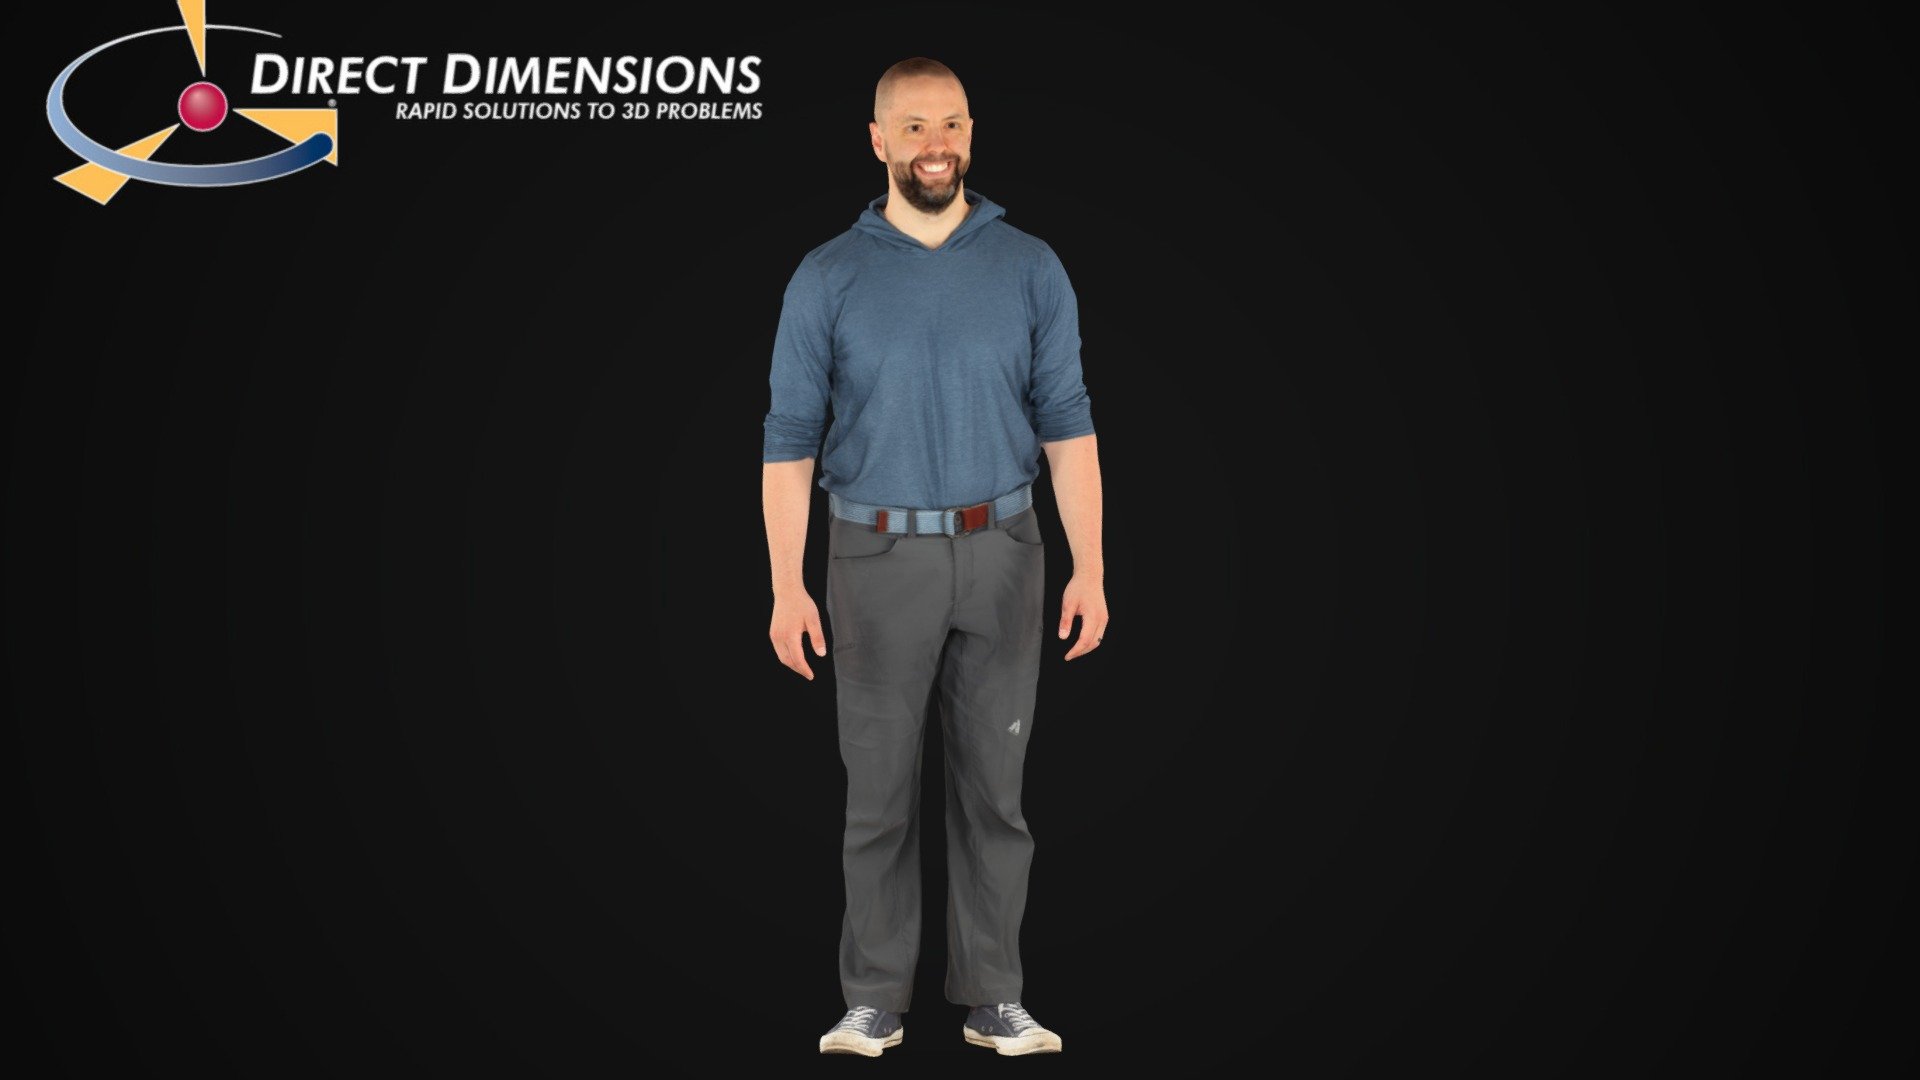 Mike S. in 3D